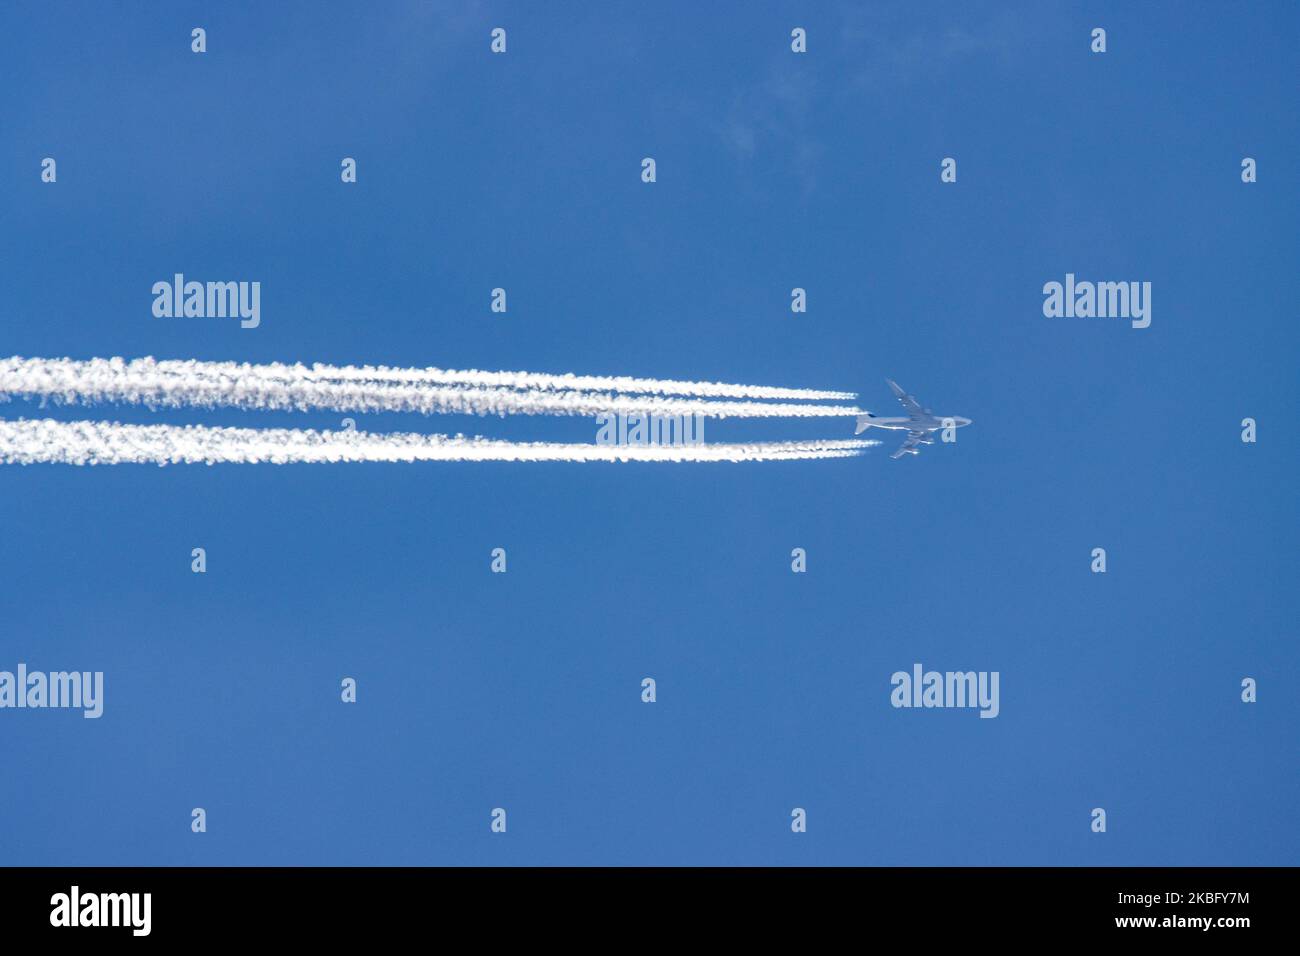 Lufthansa Boeing 747 commercial airplane overfly forming engine exhaust contrails behind in high altitude in the blue sky. The iconic double-decker Jumbo Jet nicknamed Queen of the Skies is flying at 34.000 feet on 29 January 2020 over the Netherlands as it is flying a trans-Atlantic route from Frankfurt FRA airport in Germany to Toronto, YYZ, Canada, flight LH470 / DLH470. The overflying aircraft is a Boeing 747-430, B744 with registration D-ABVX and speed 726km/h or 392 kts (knots). Lufthansa is the flag carrier of Germany and a Star Alliance member. (Photo by Nicolas Economou/NurPhoto) Stock Photo